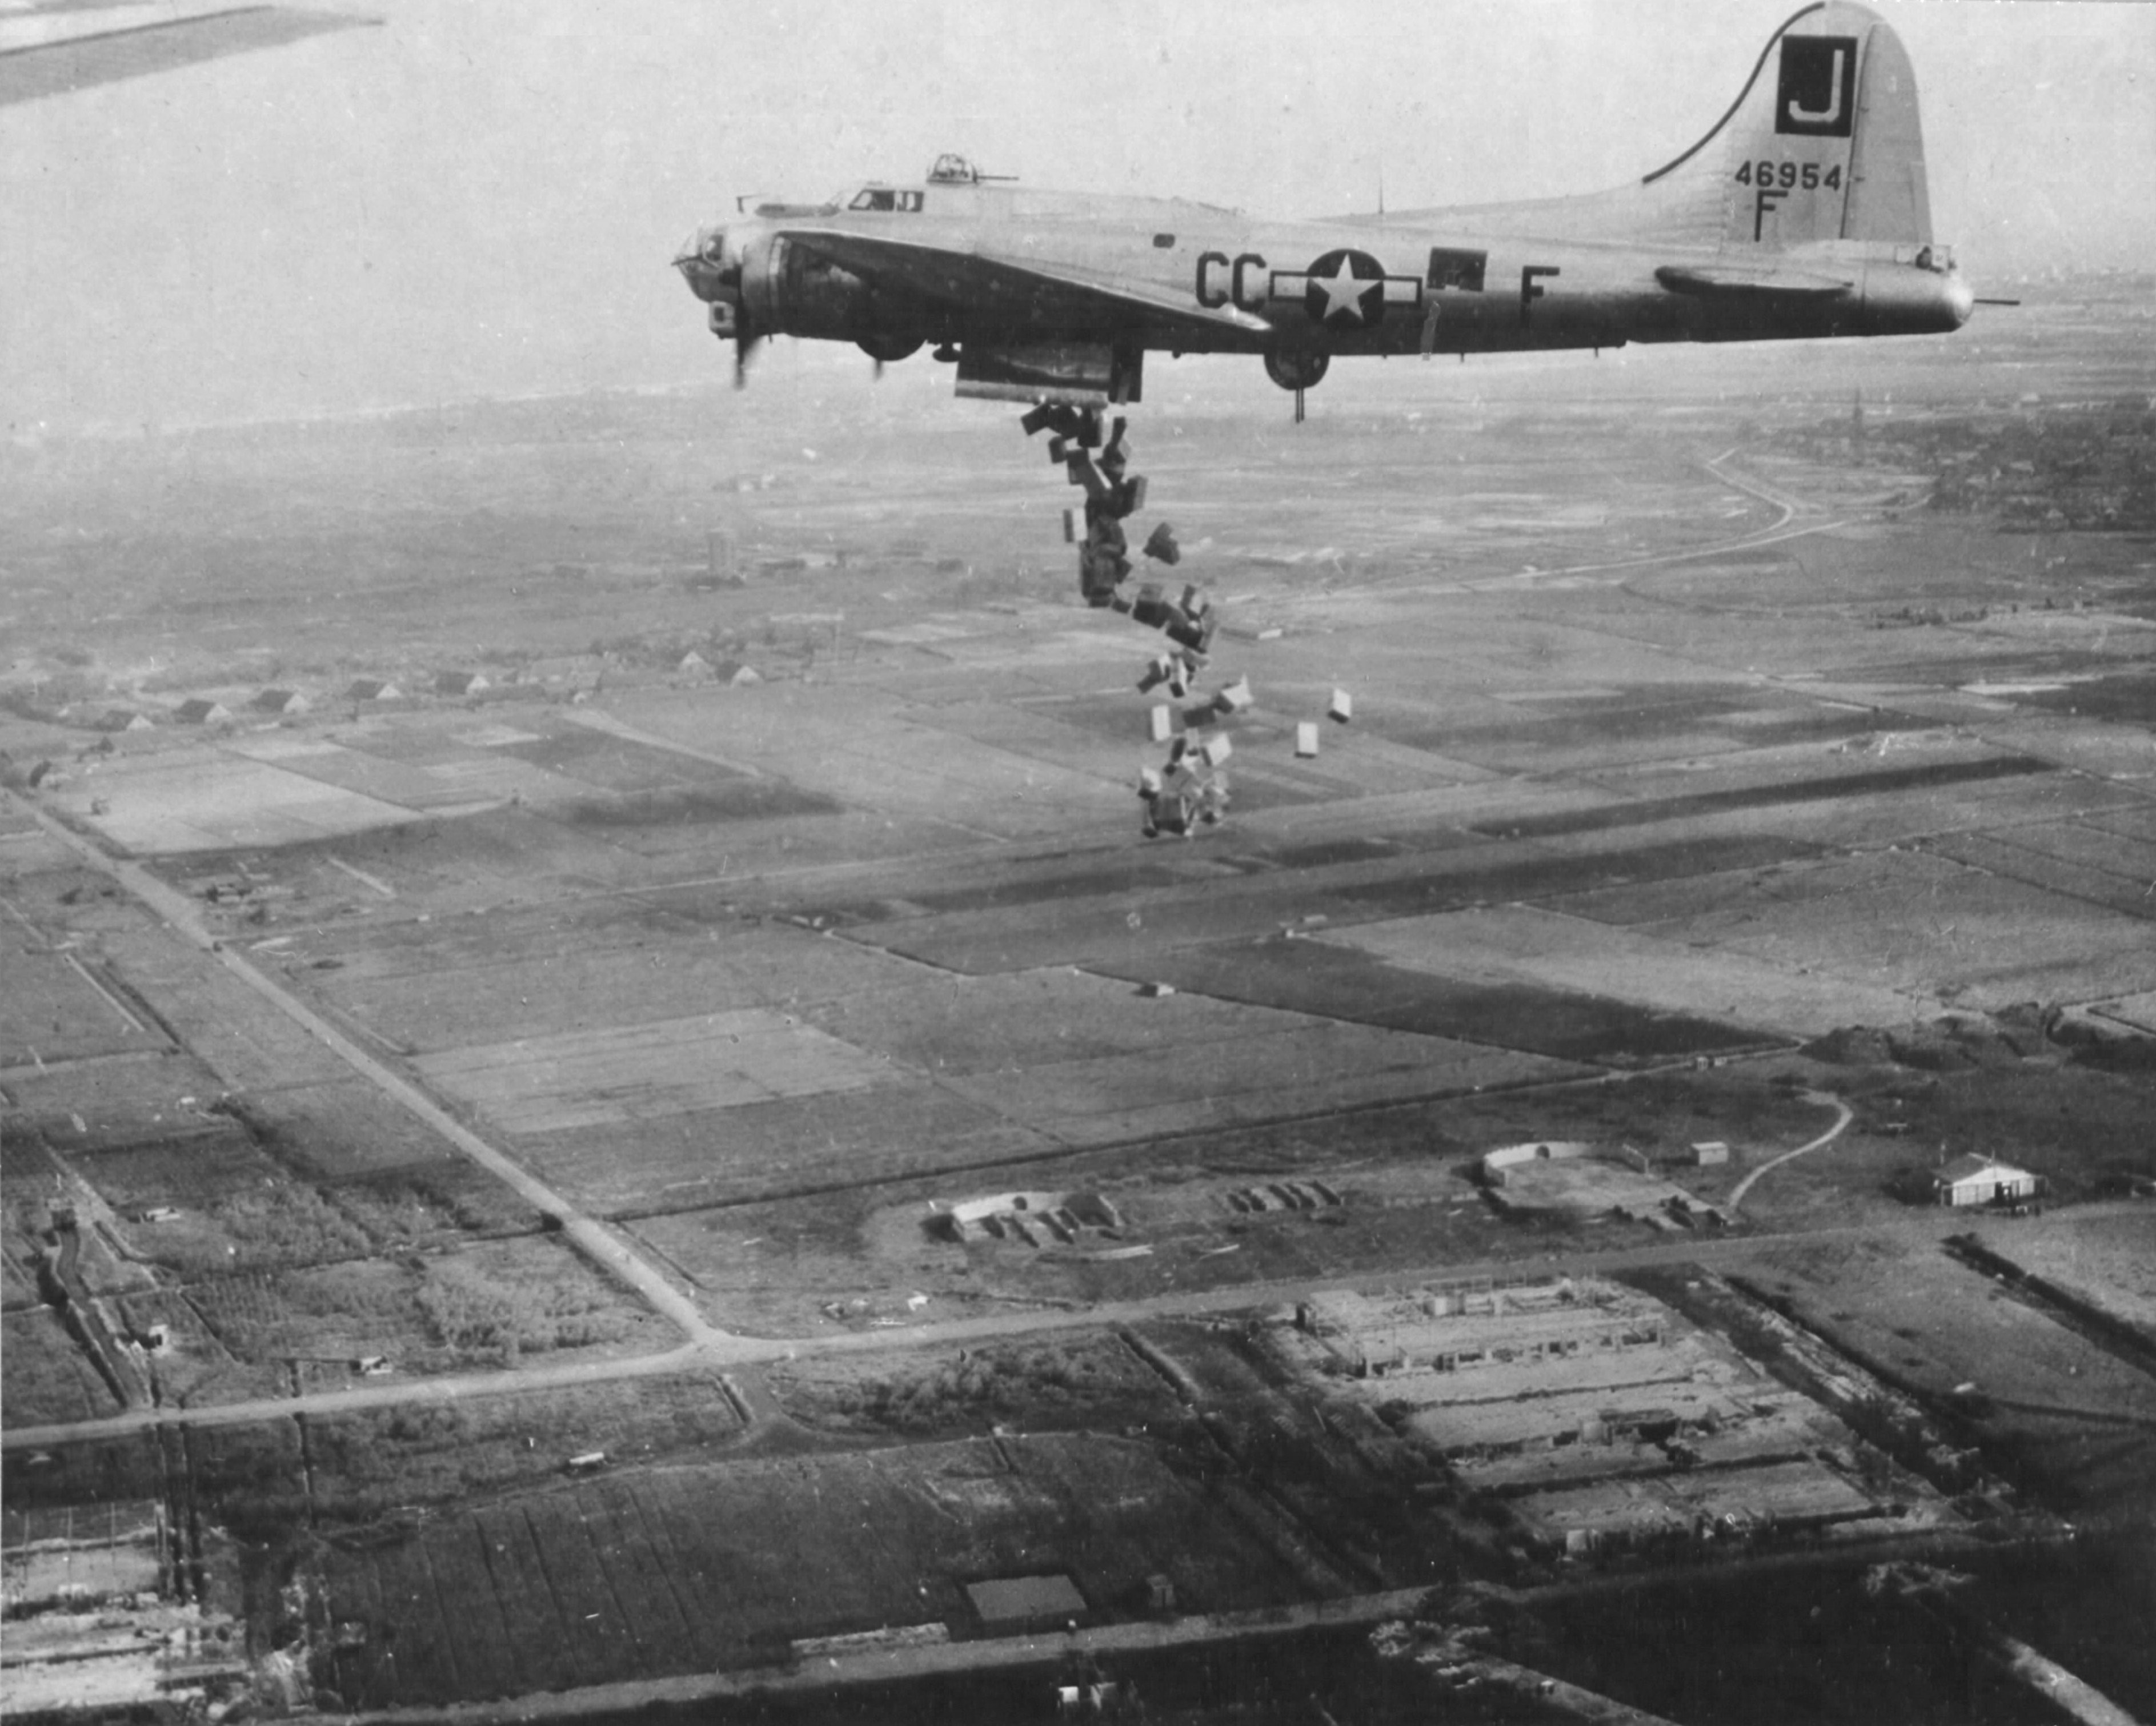 B-17G Fortress “Liquid-8-Or” of 569th Bomb Squadron dropping cases of “10 in 1” rations into Holland during Operation Chowhound aimed at breaking the famine in western Holland, May 1 or 3 1945.